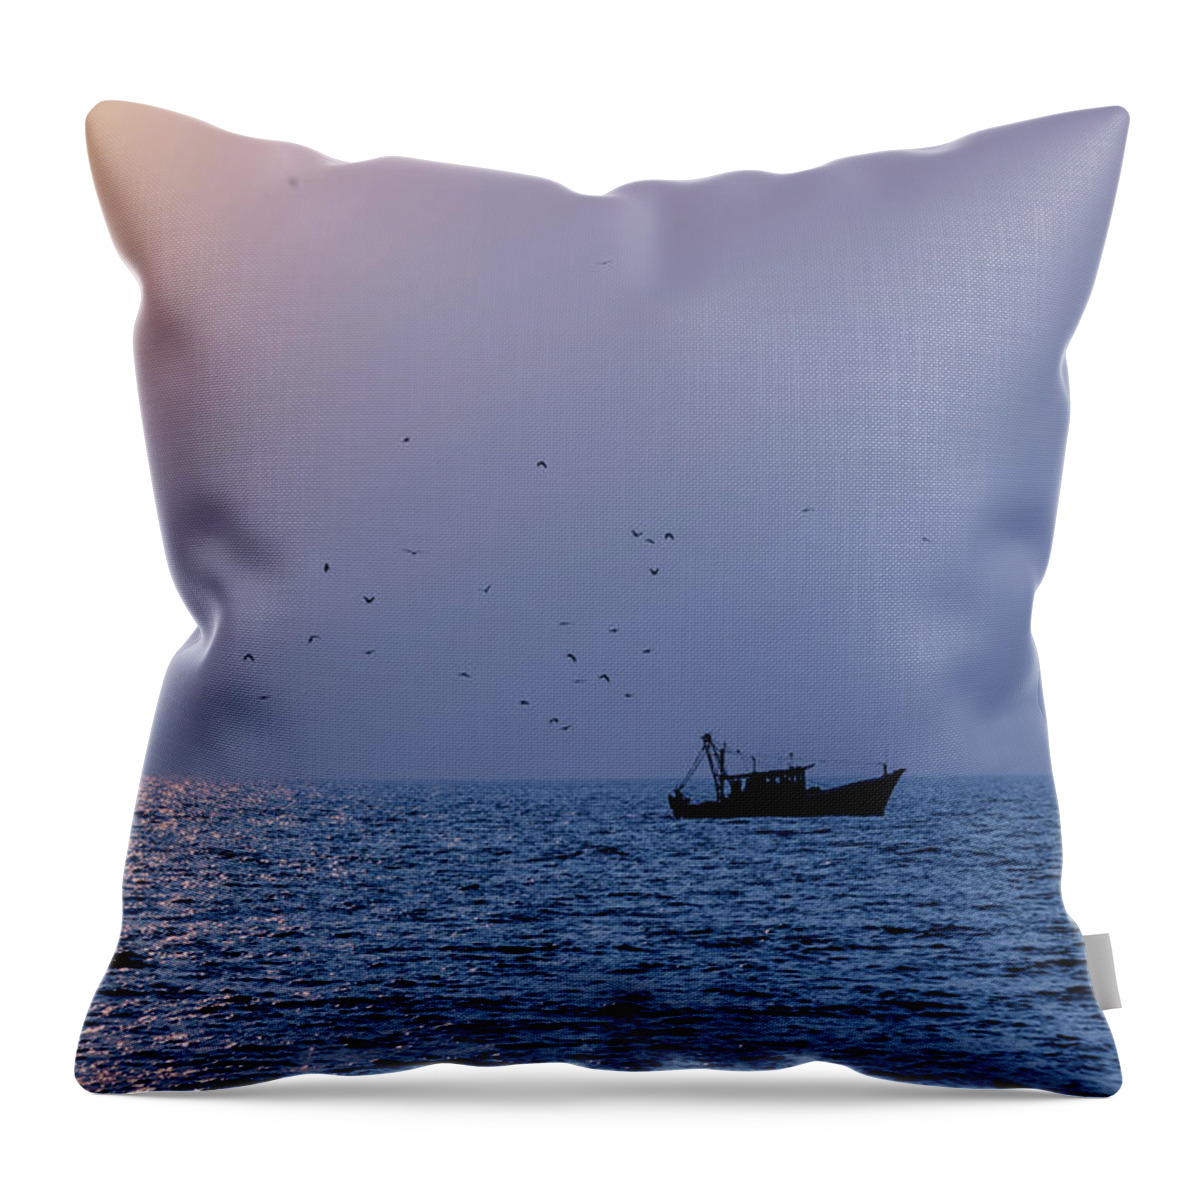 Arabian Sea Throw Pillow featuring the photograph All in a Day's Work by Manpreet Sokhi